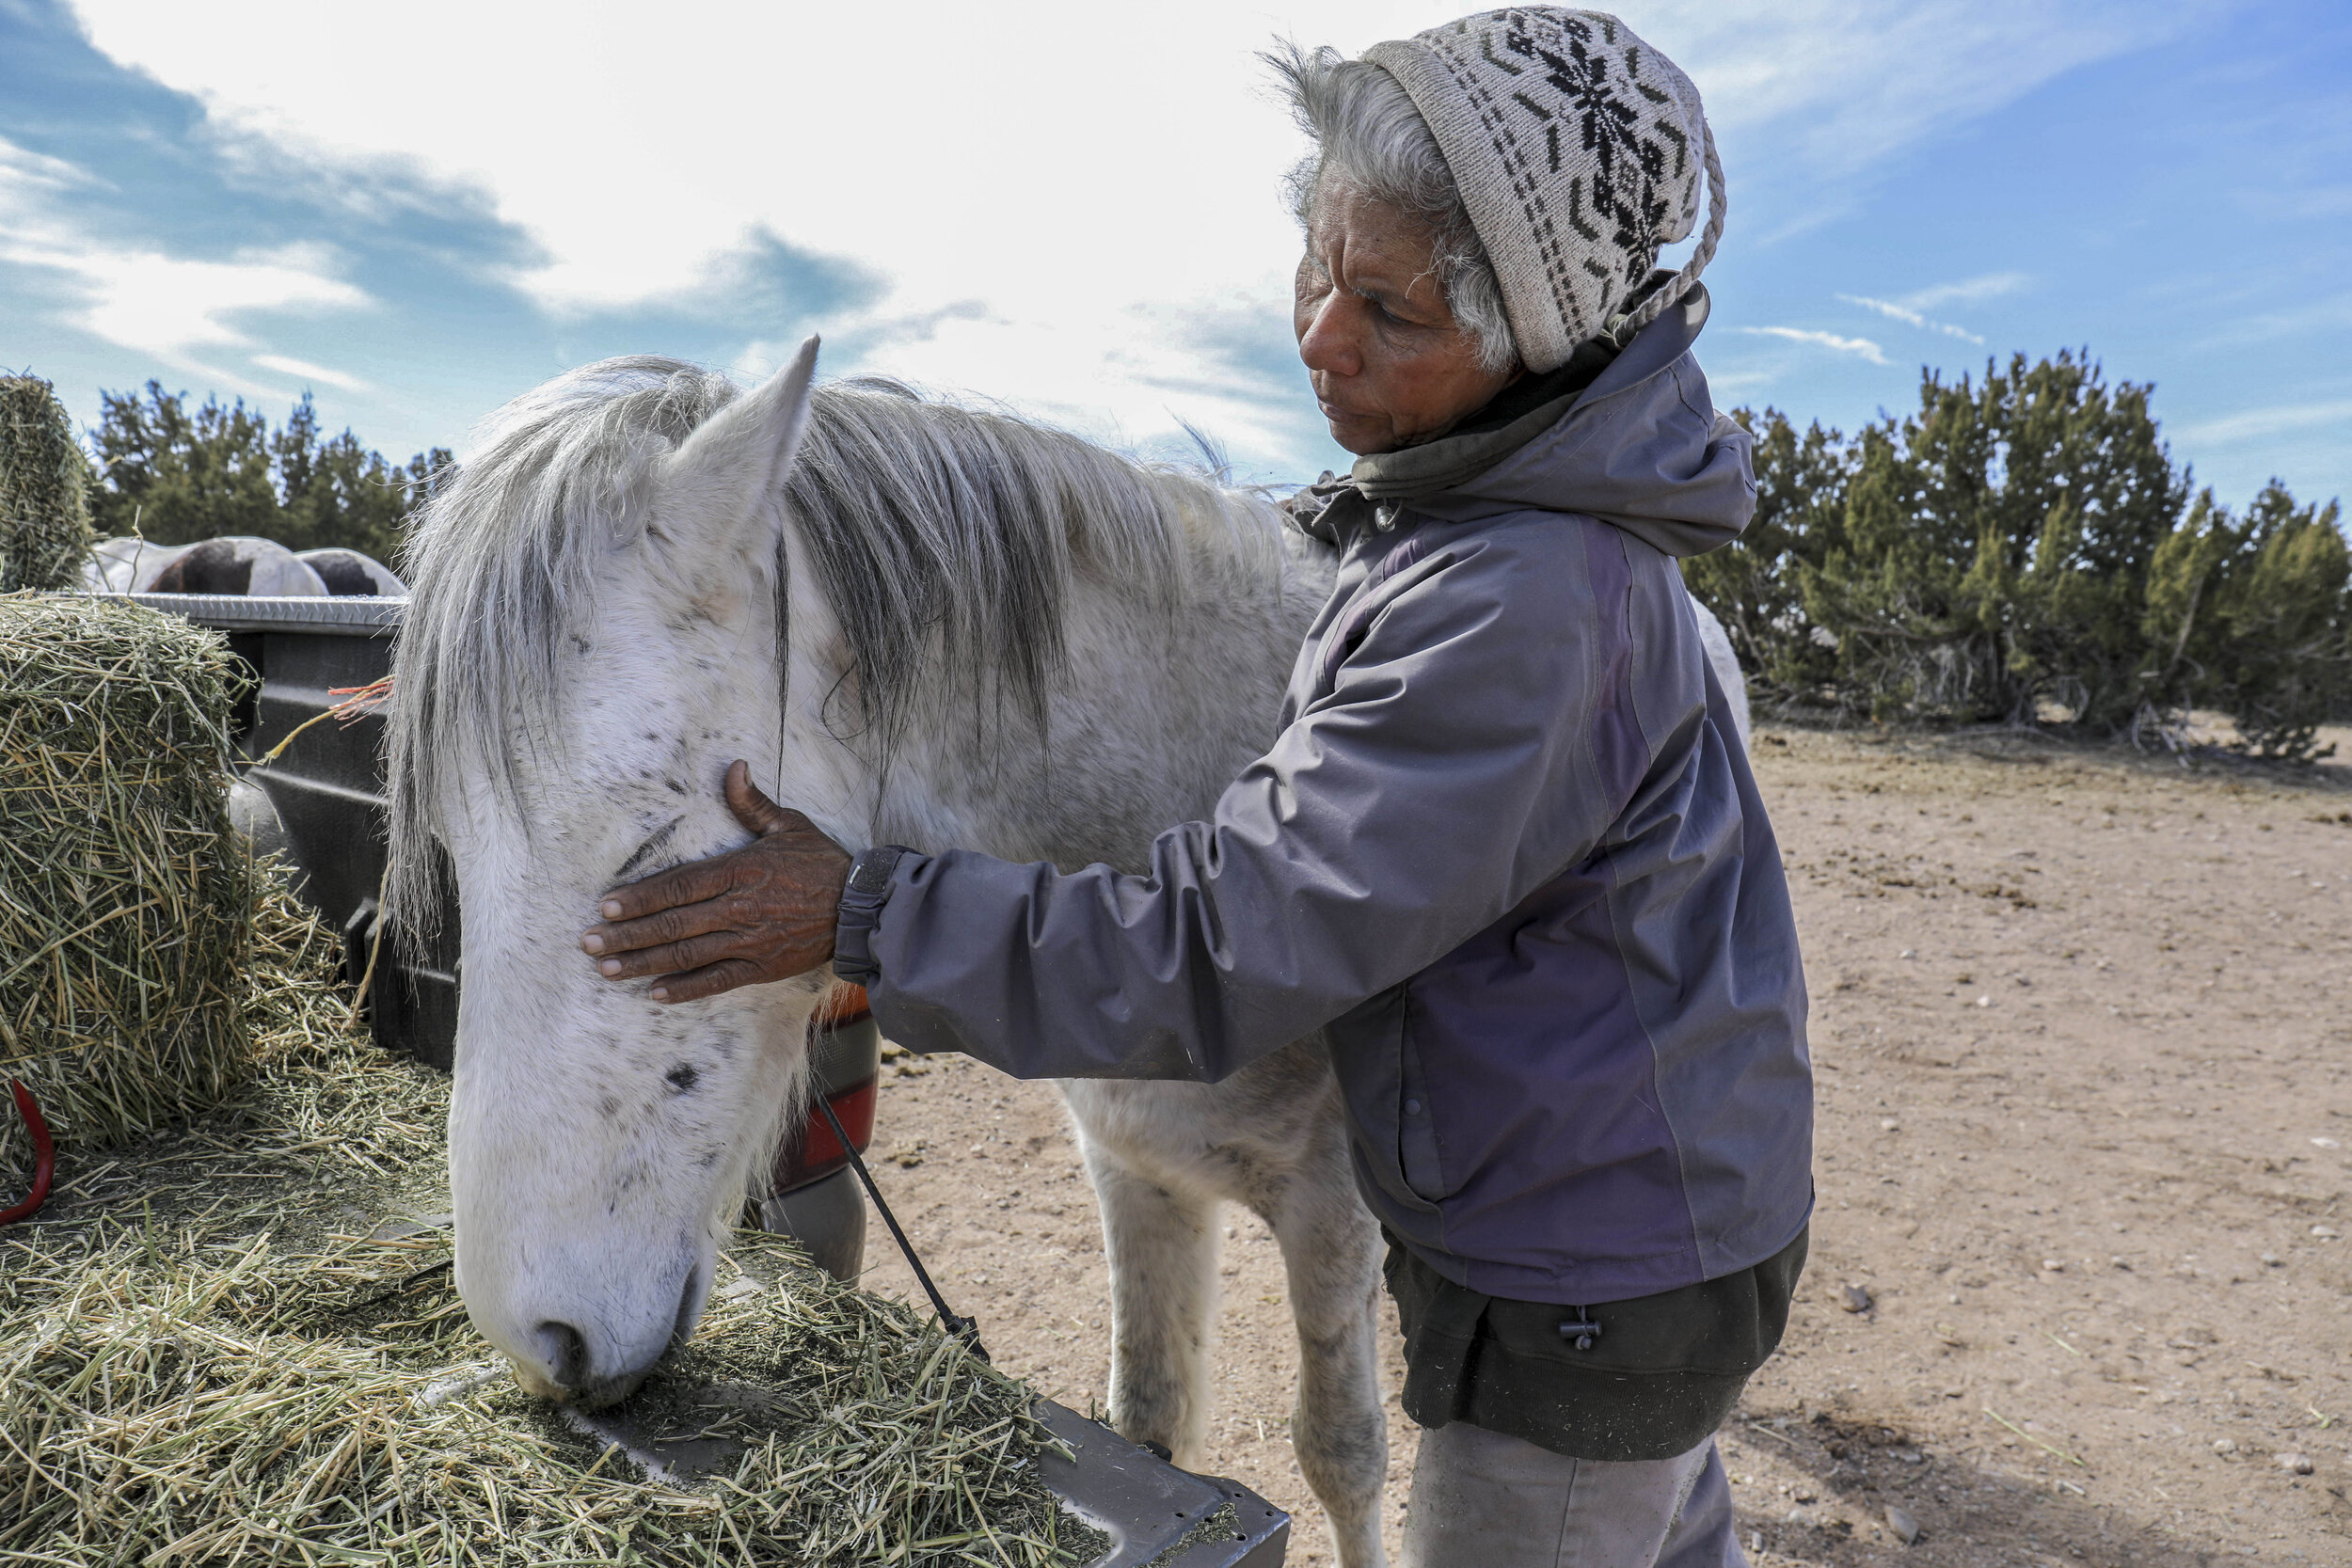  Adelina Sosa, a longtime volunteer for the nonprofit organization Placitas Wild, pets one of the free-roaming horses she cared for on a daily basis outside of Placitas, New Mexico, in February. A month later, Placitas Wild had to find new homes for 